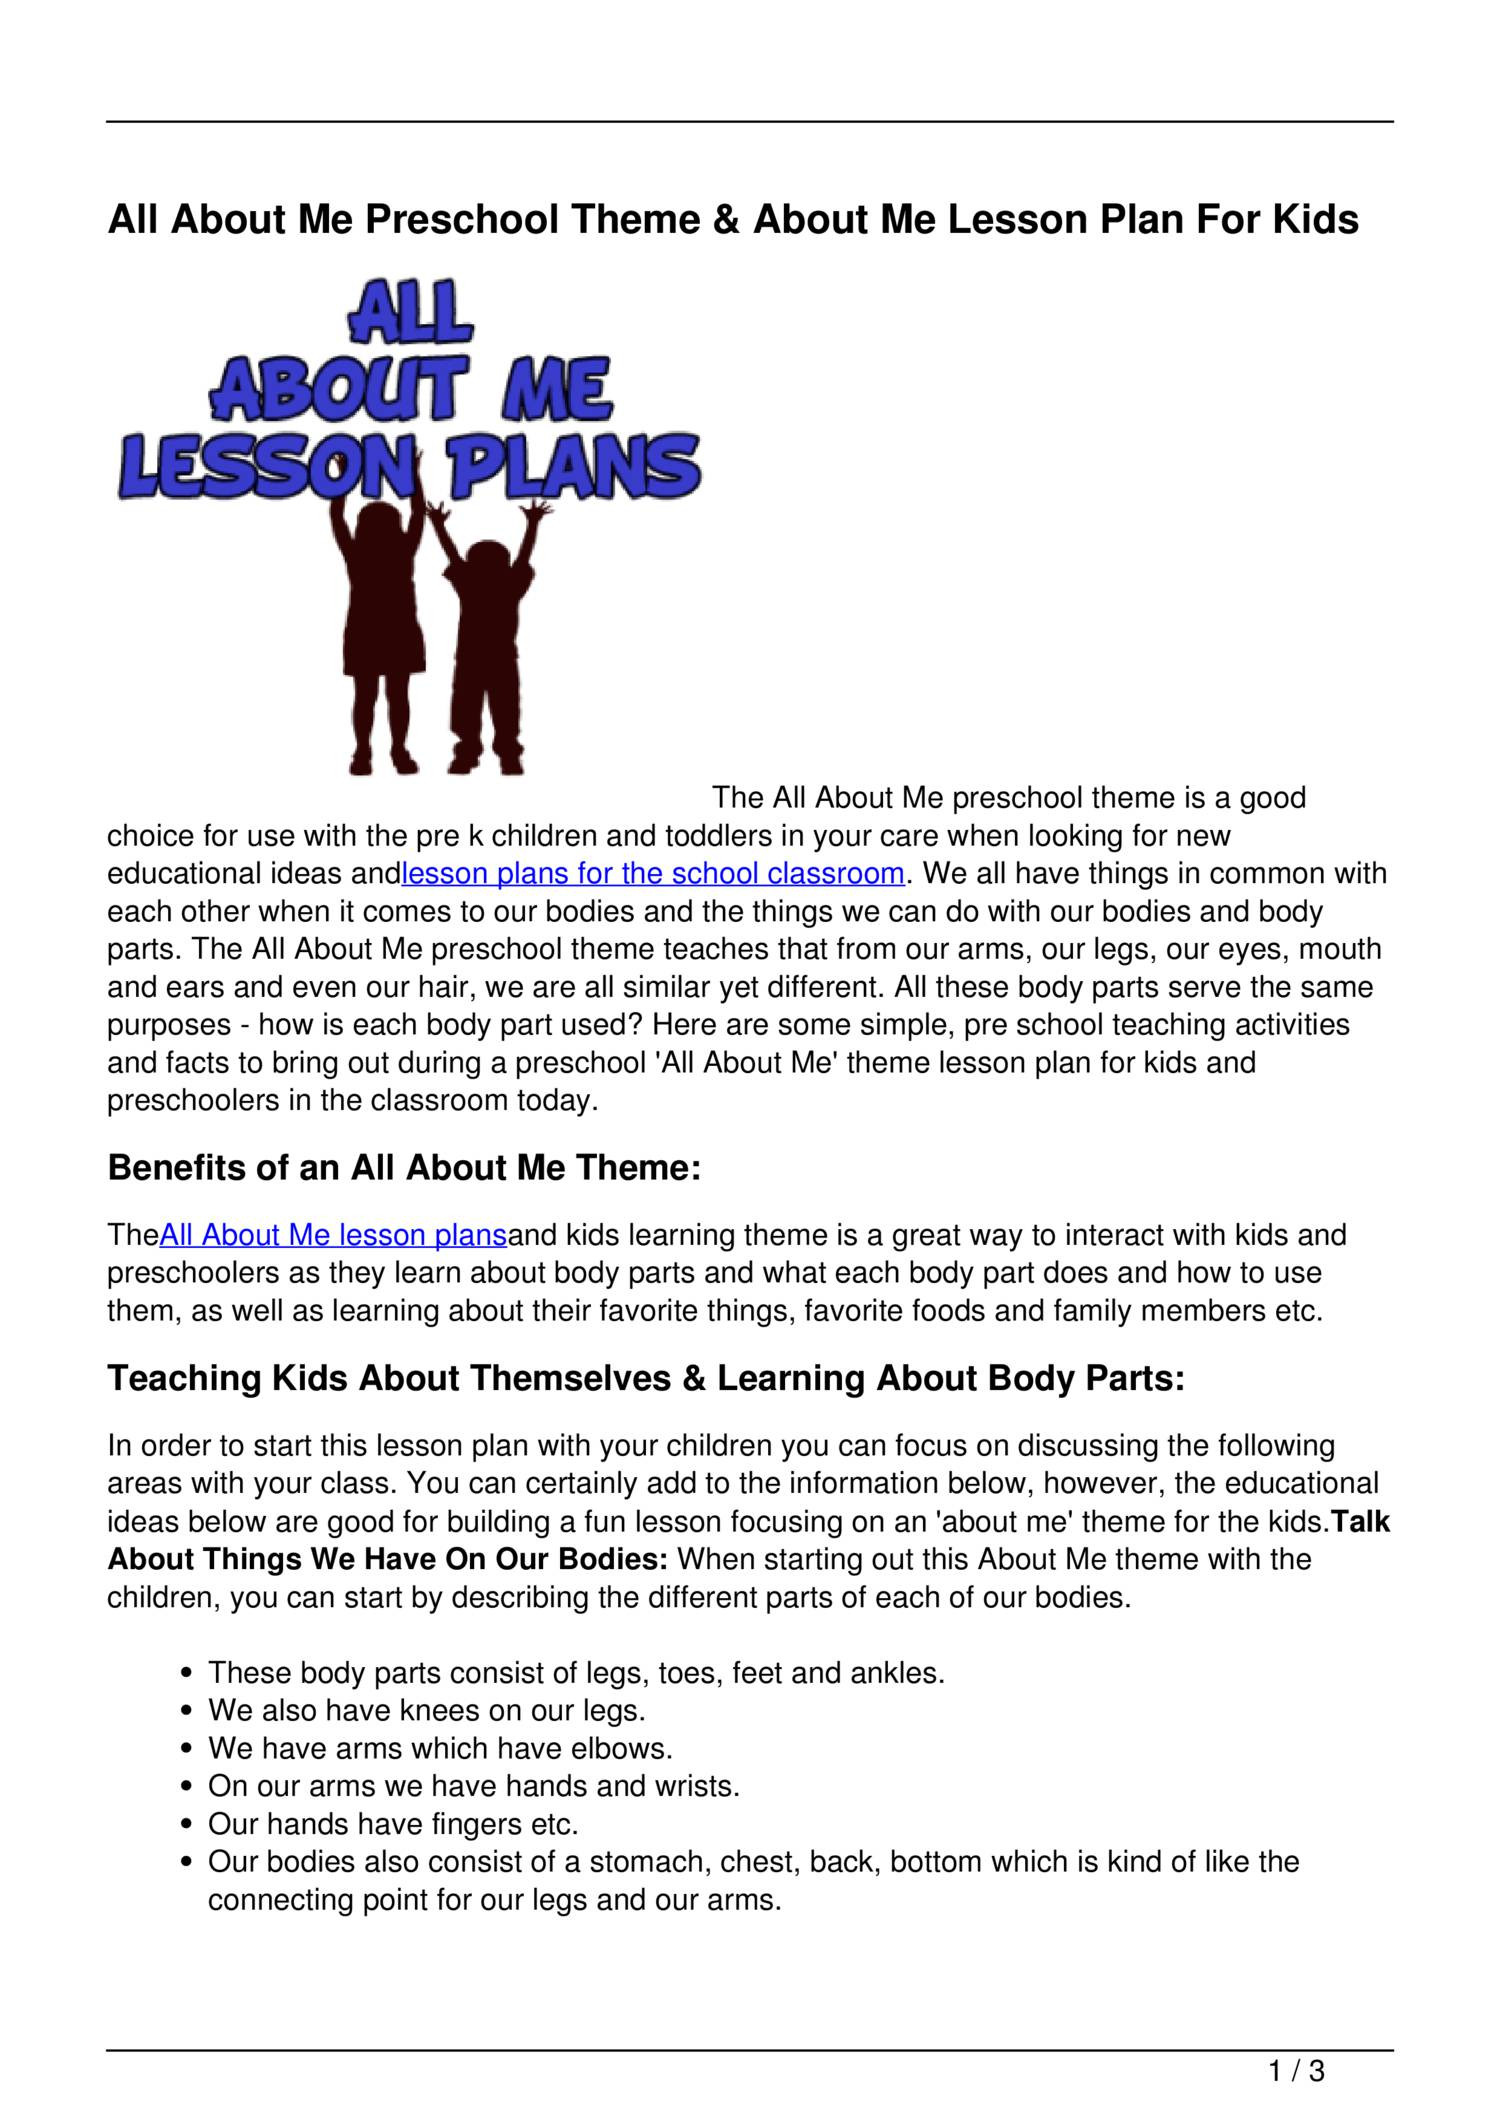 All About Me Lesson Plans All About Me theme Lesson Plan for Kids Pdf Docdroid